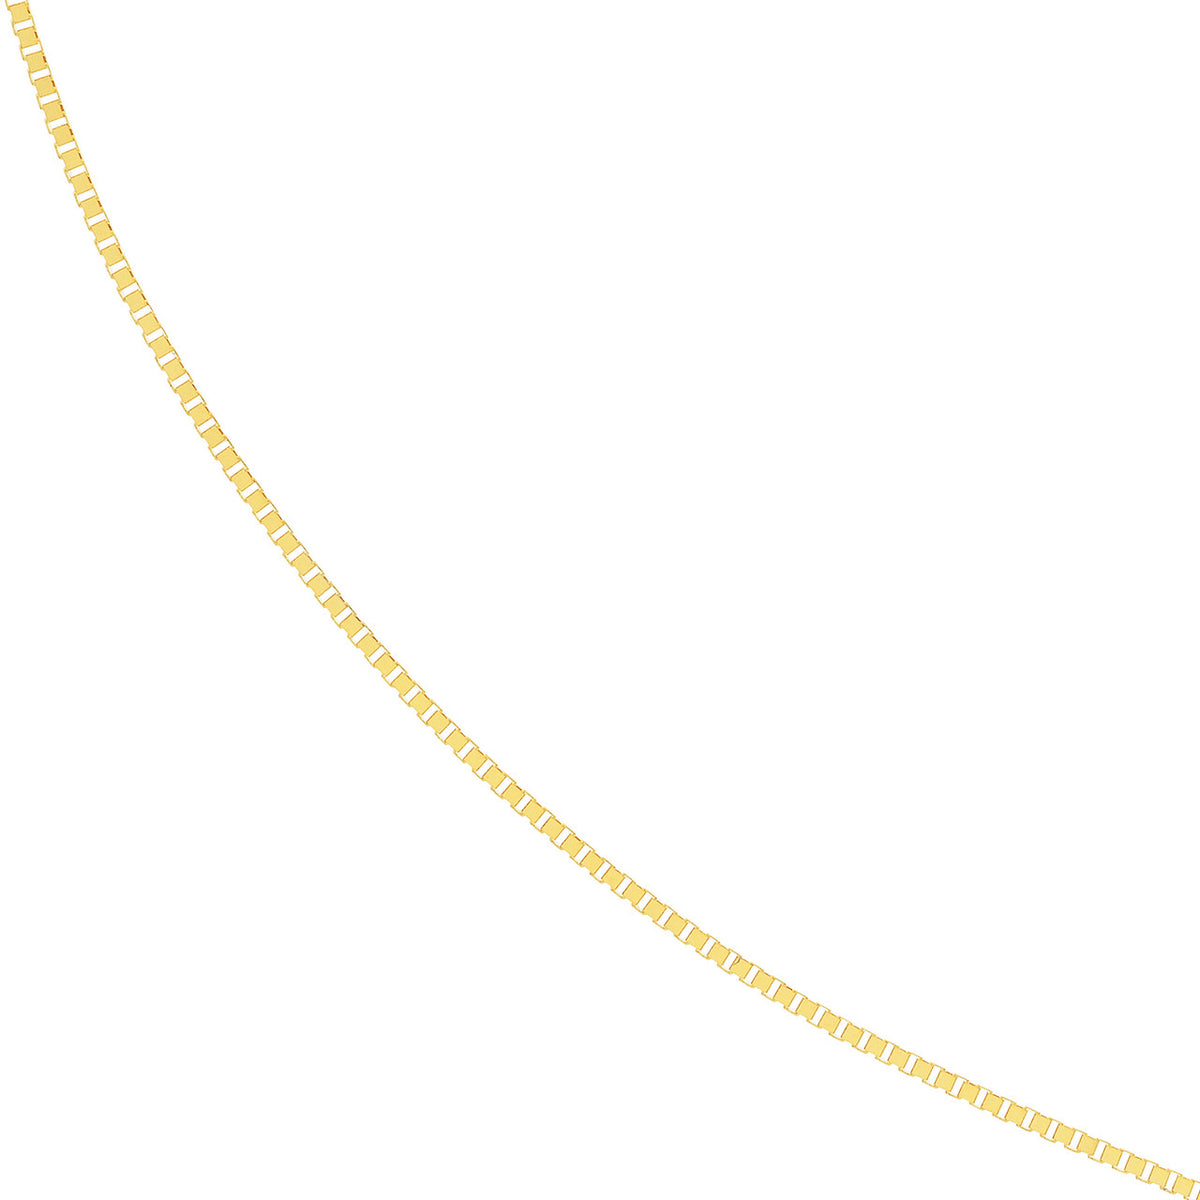 14K Yellow Gold and White Gold 0.66mm Adjustable Box Chain Necklace with Lobster Lock